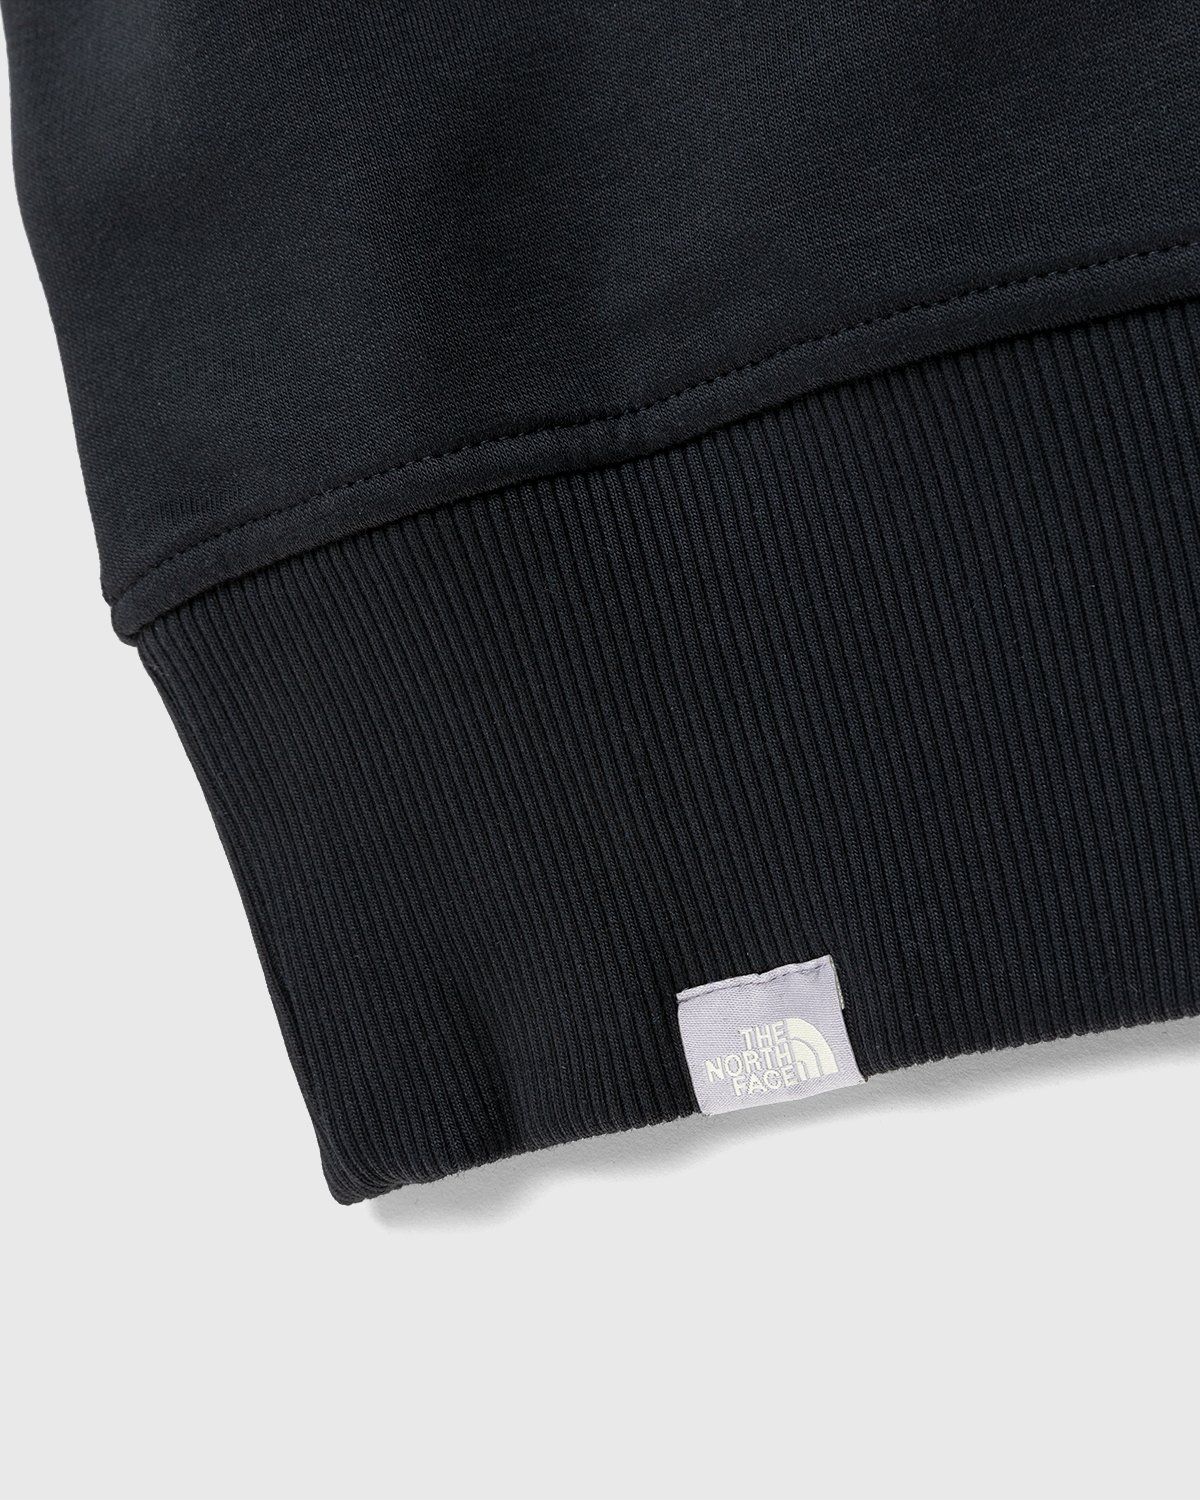 The North Face – Oversized Essential Hoodie Black - Sweats - Black - Image 4